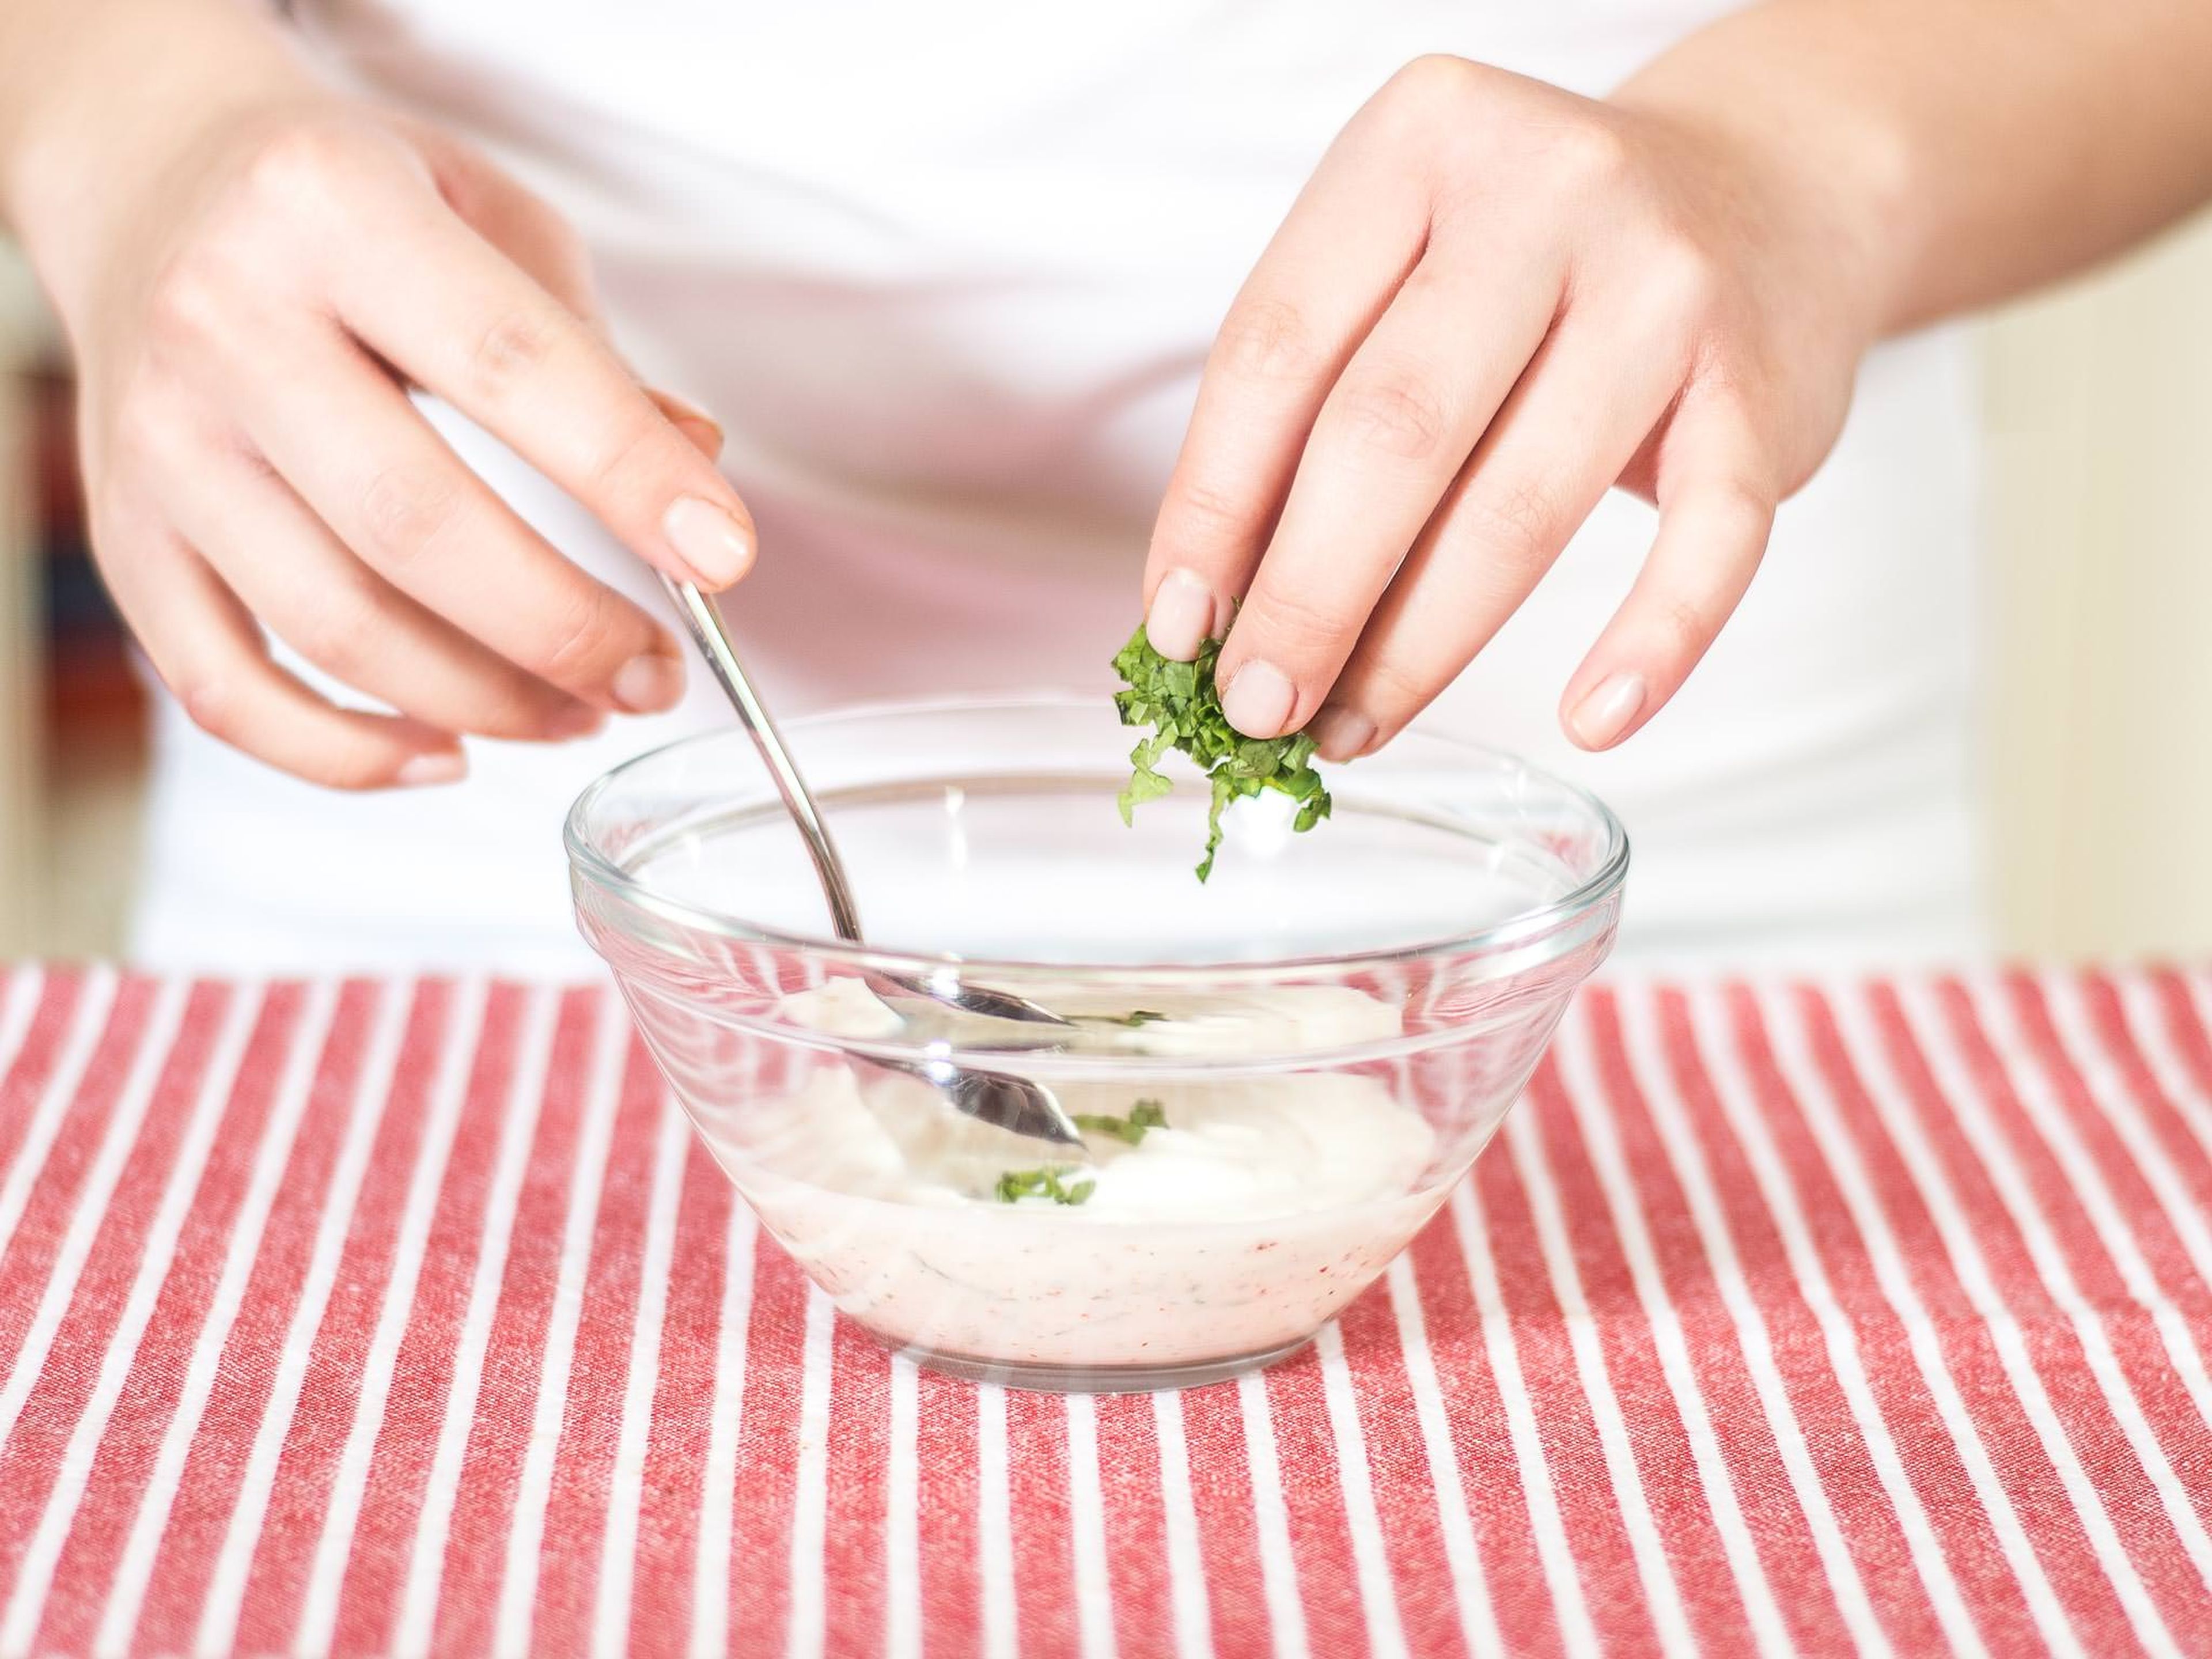 For the mint yogurt, mix natural yogurt with confectioner's sugar and the lime juice. Cut the mint leaves into thin strips and fold into the yogurt.